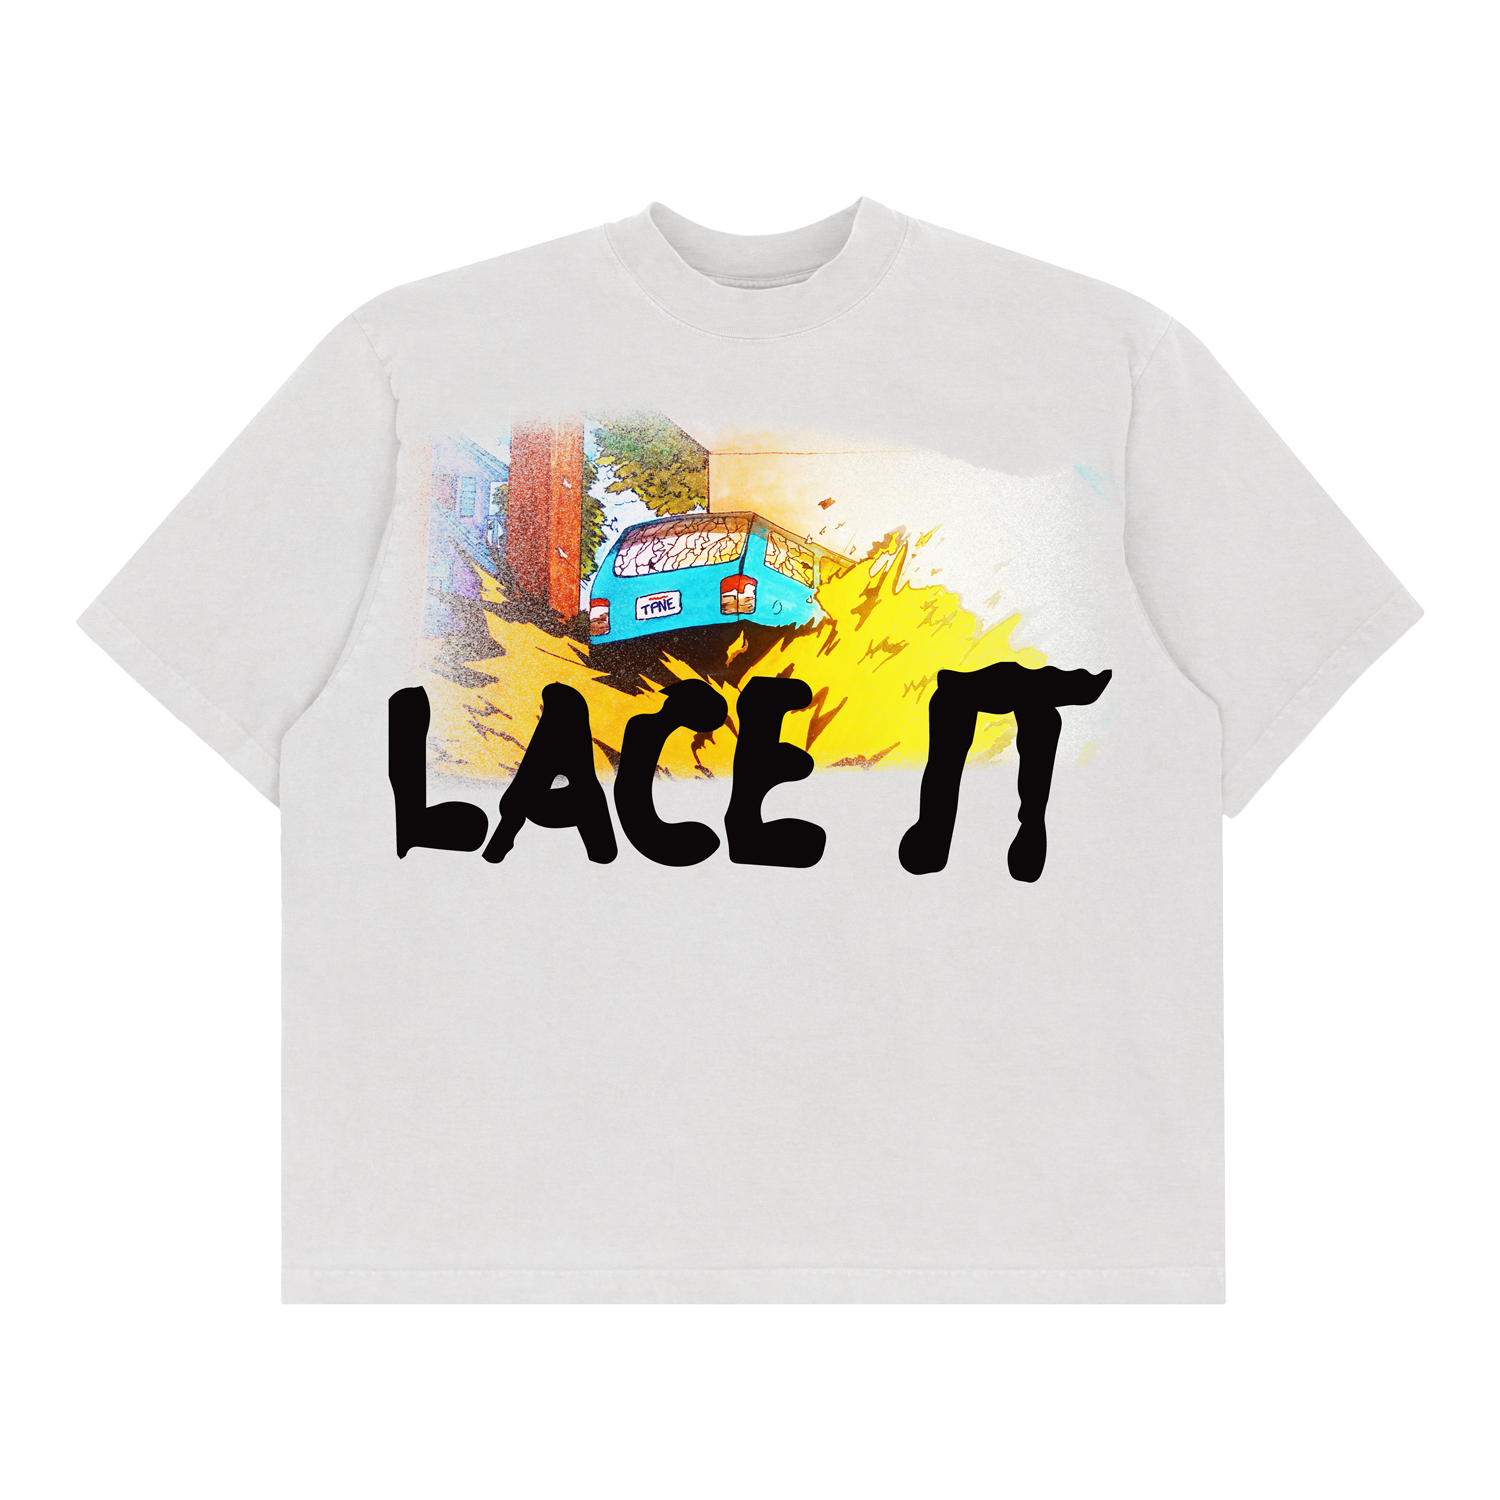 LACE IT COVER TEE - WHITE